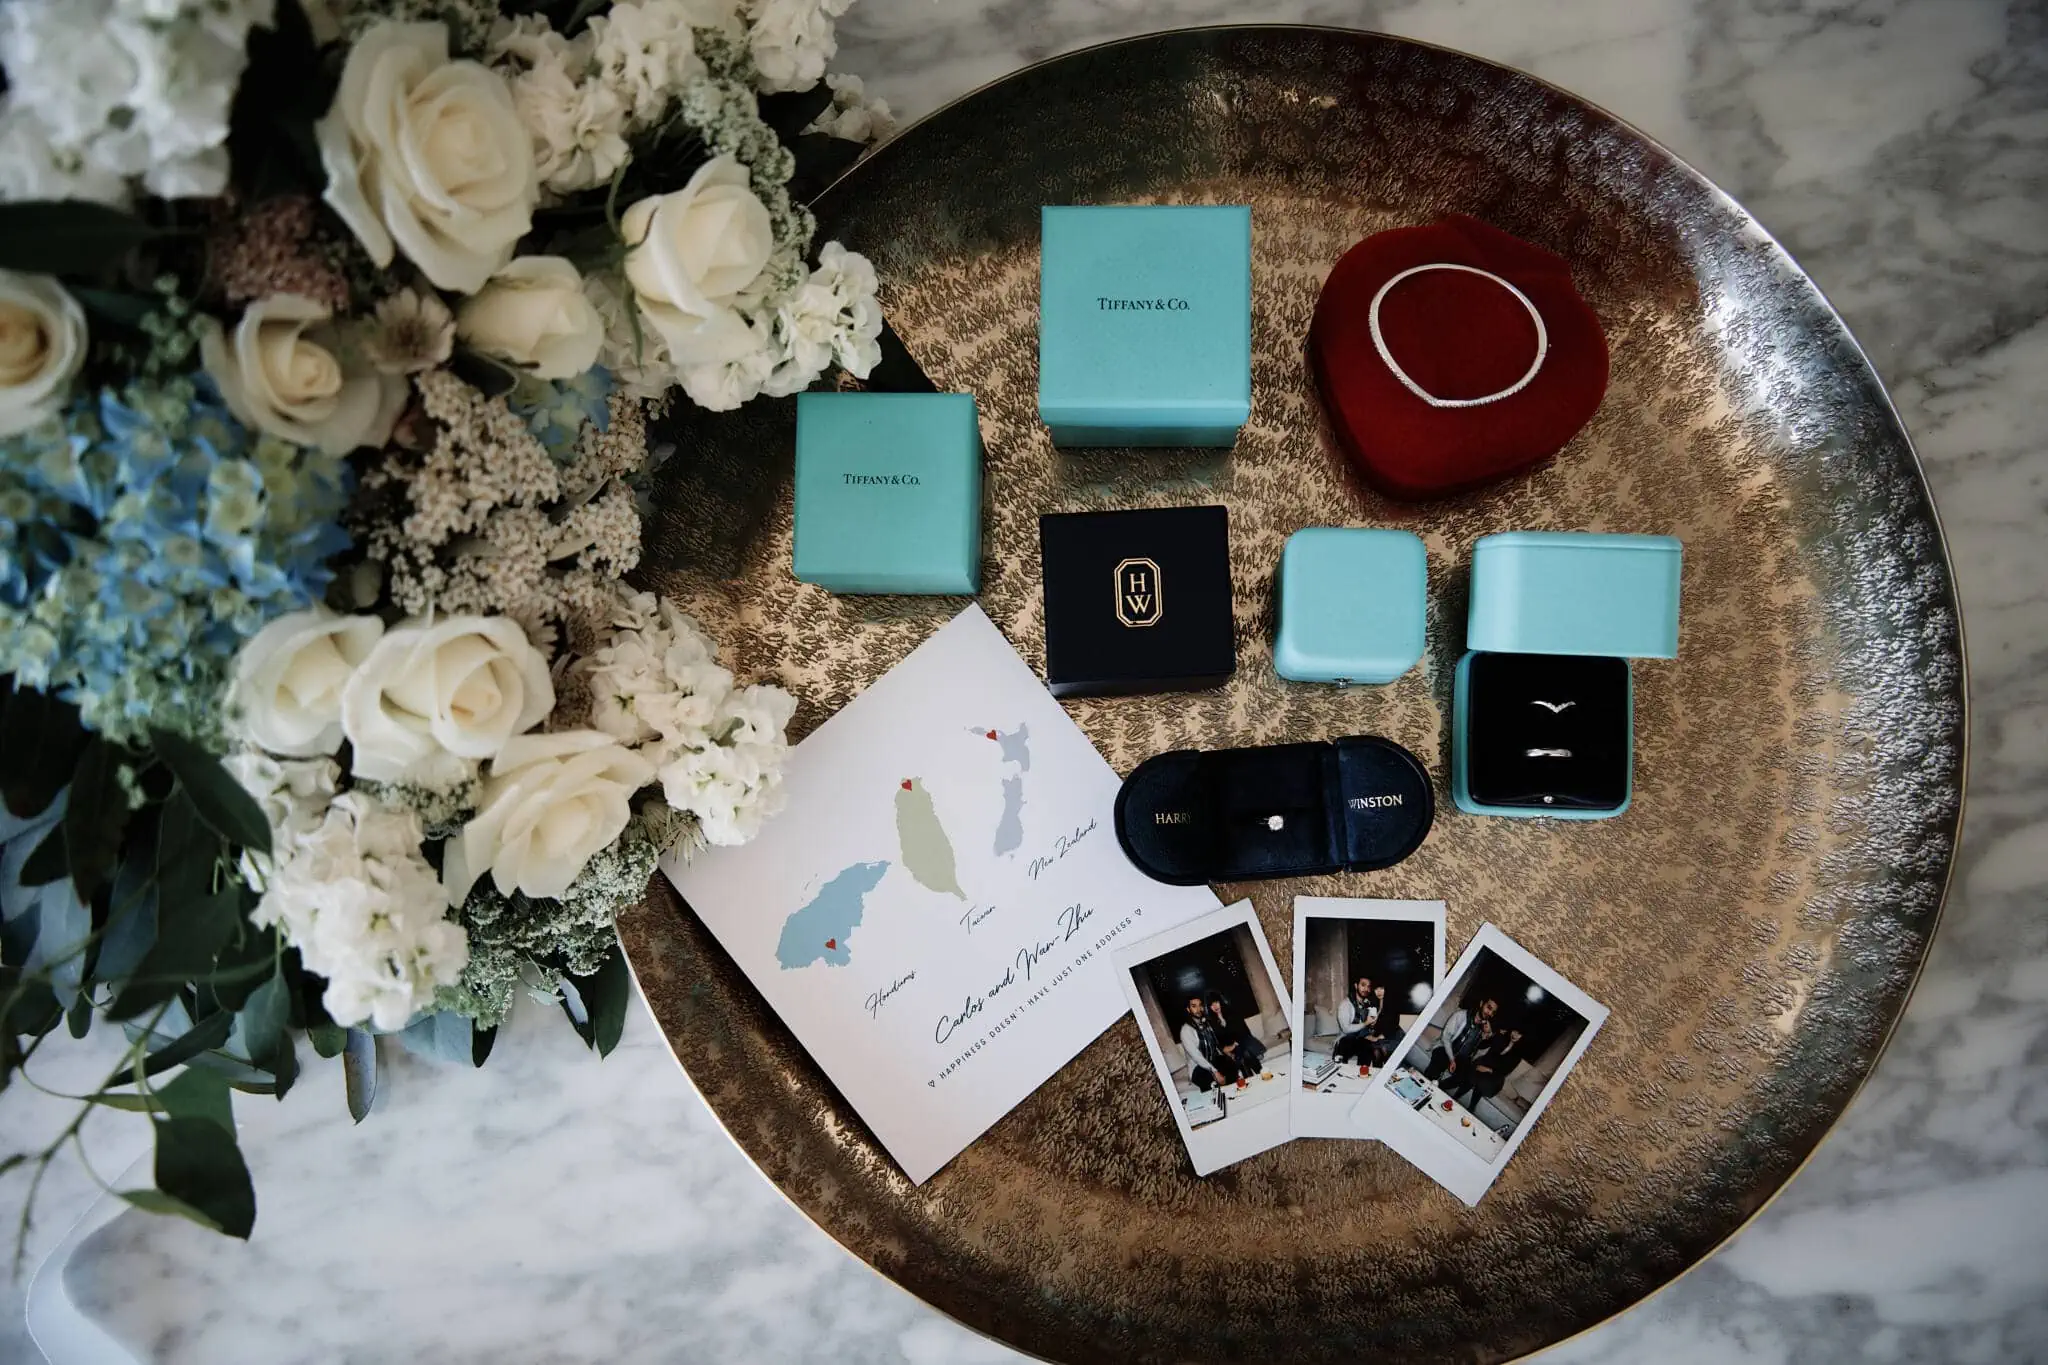 Tiffany & Co engagement ring and other items on a table at Carlos and Wanzhu's intimate Cecil Peak Heli Elopement Wedding.